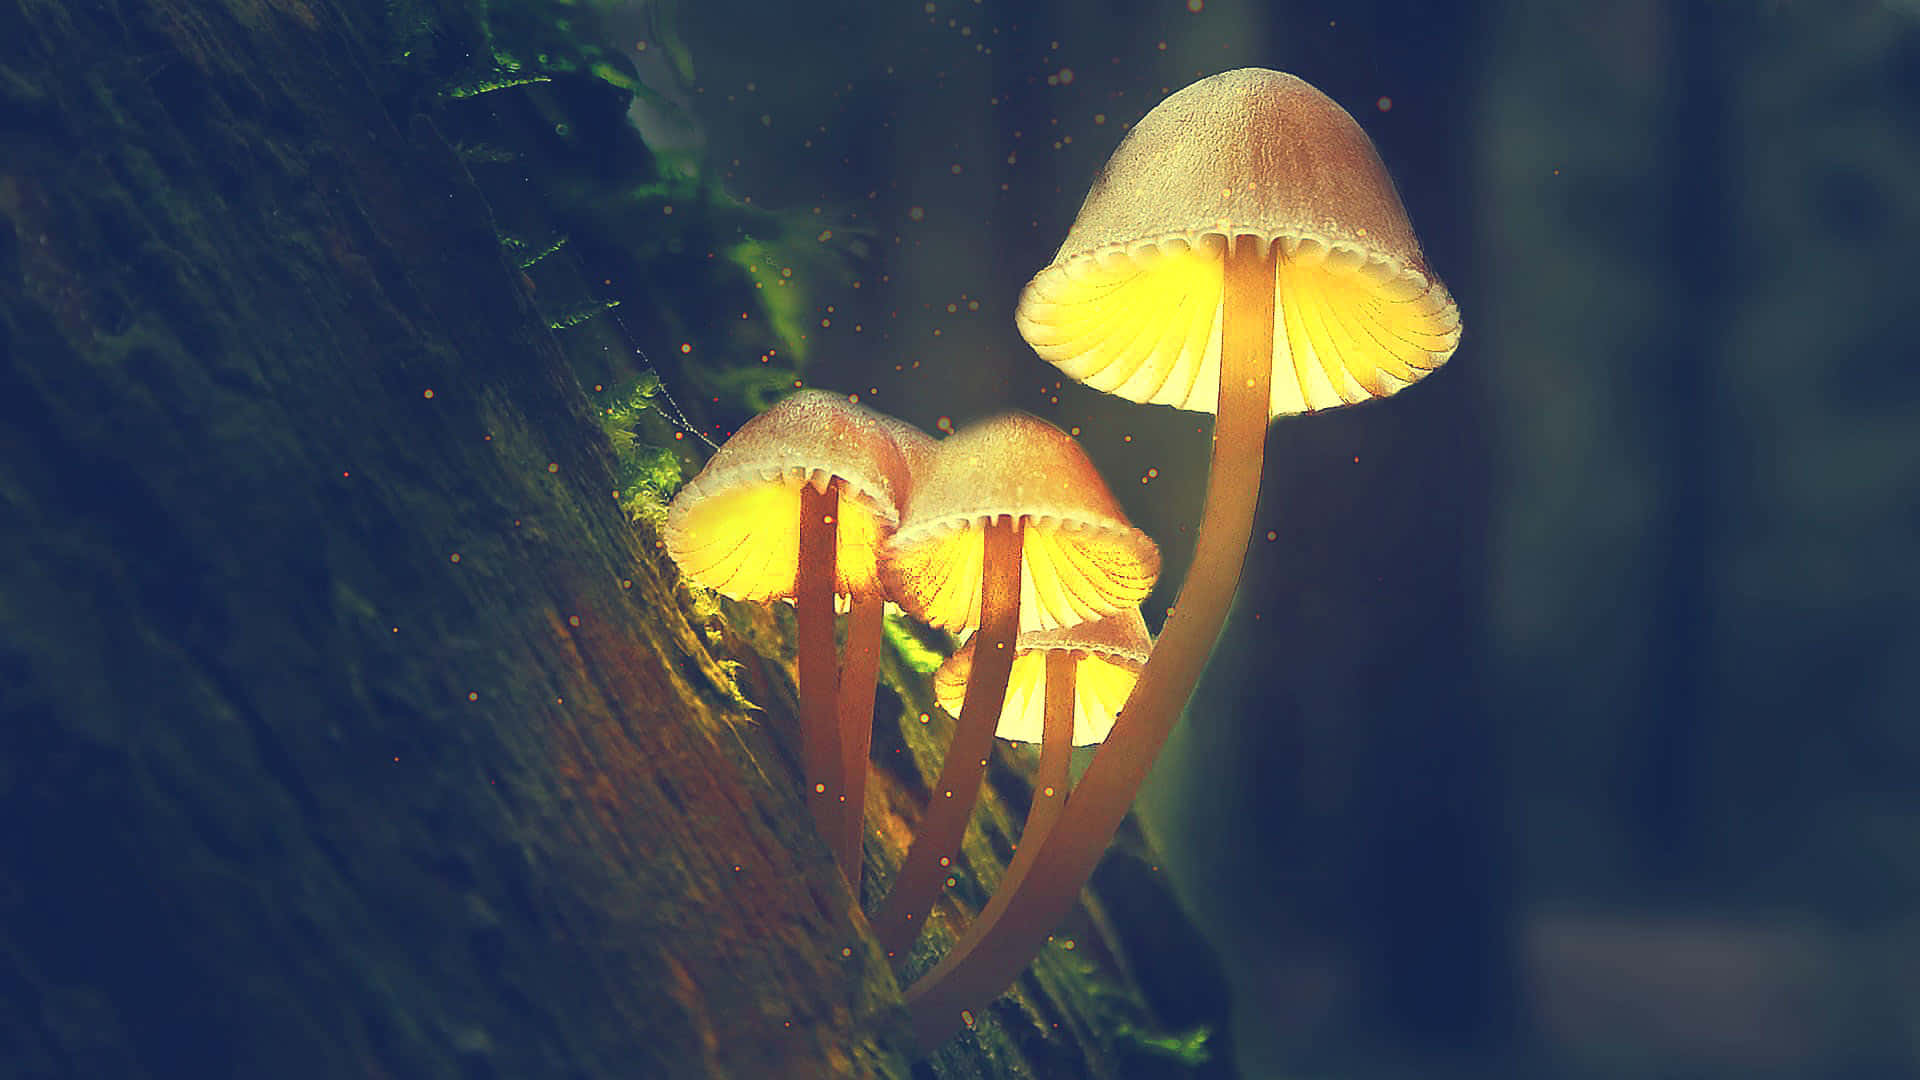 Psilocybe Fungus With Glowing Yellow Cap Picture